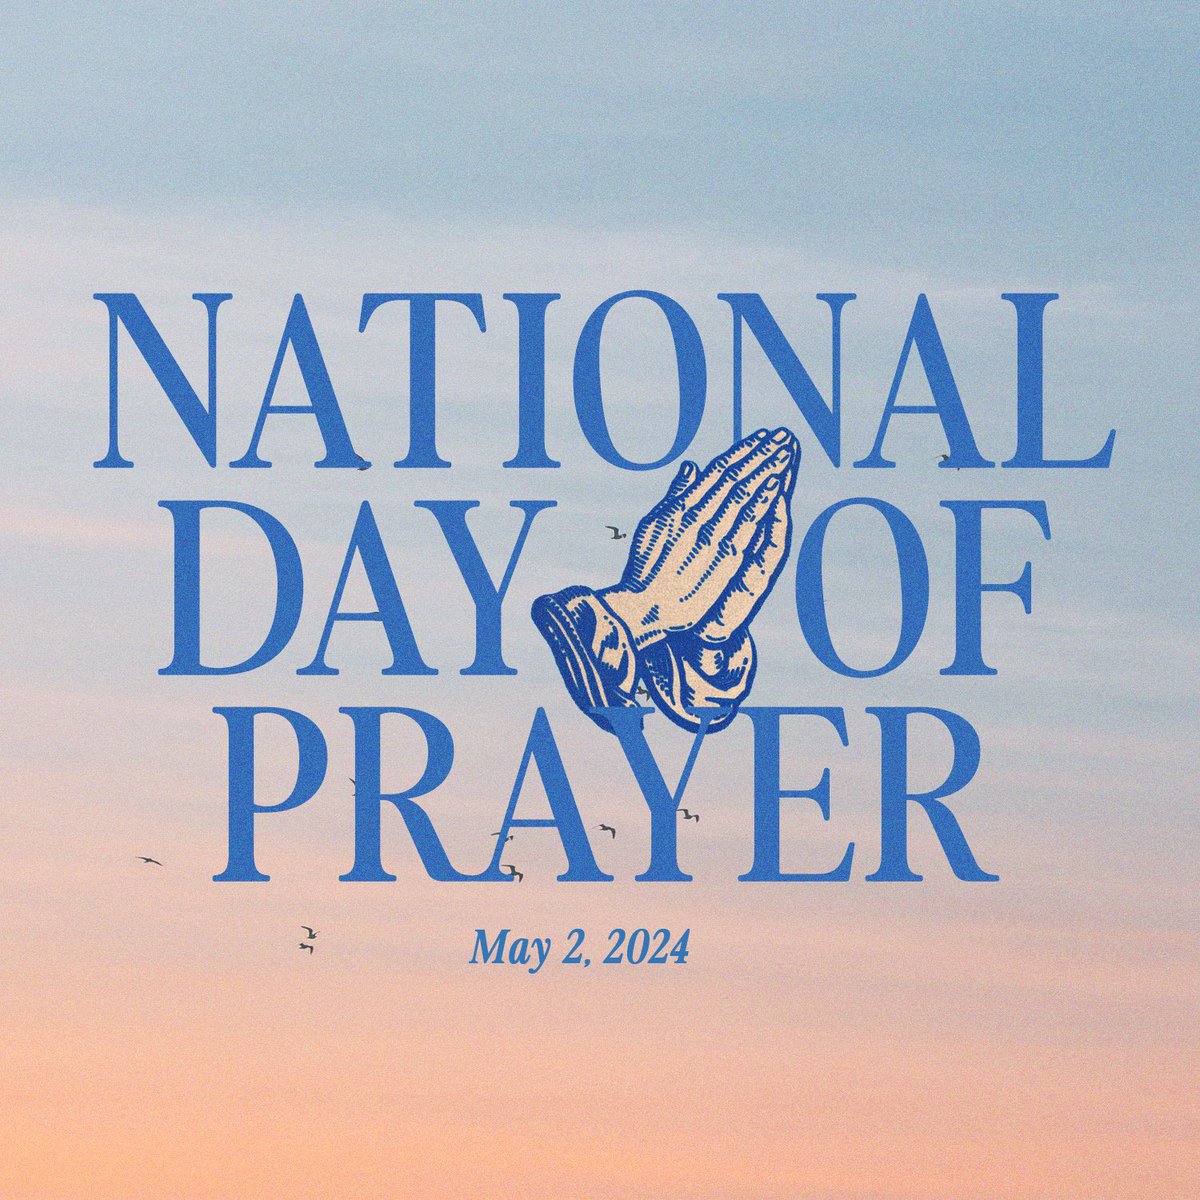 On this National Day of Prayer, Tracy and I join our fellow Southern Illinoisans in praying for our state and nation. May God’s Grace help keep us and our families safe and provide the guidance we need to get this country back on track.